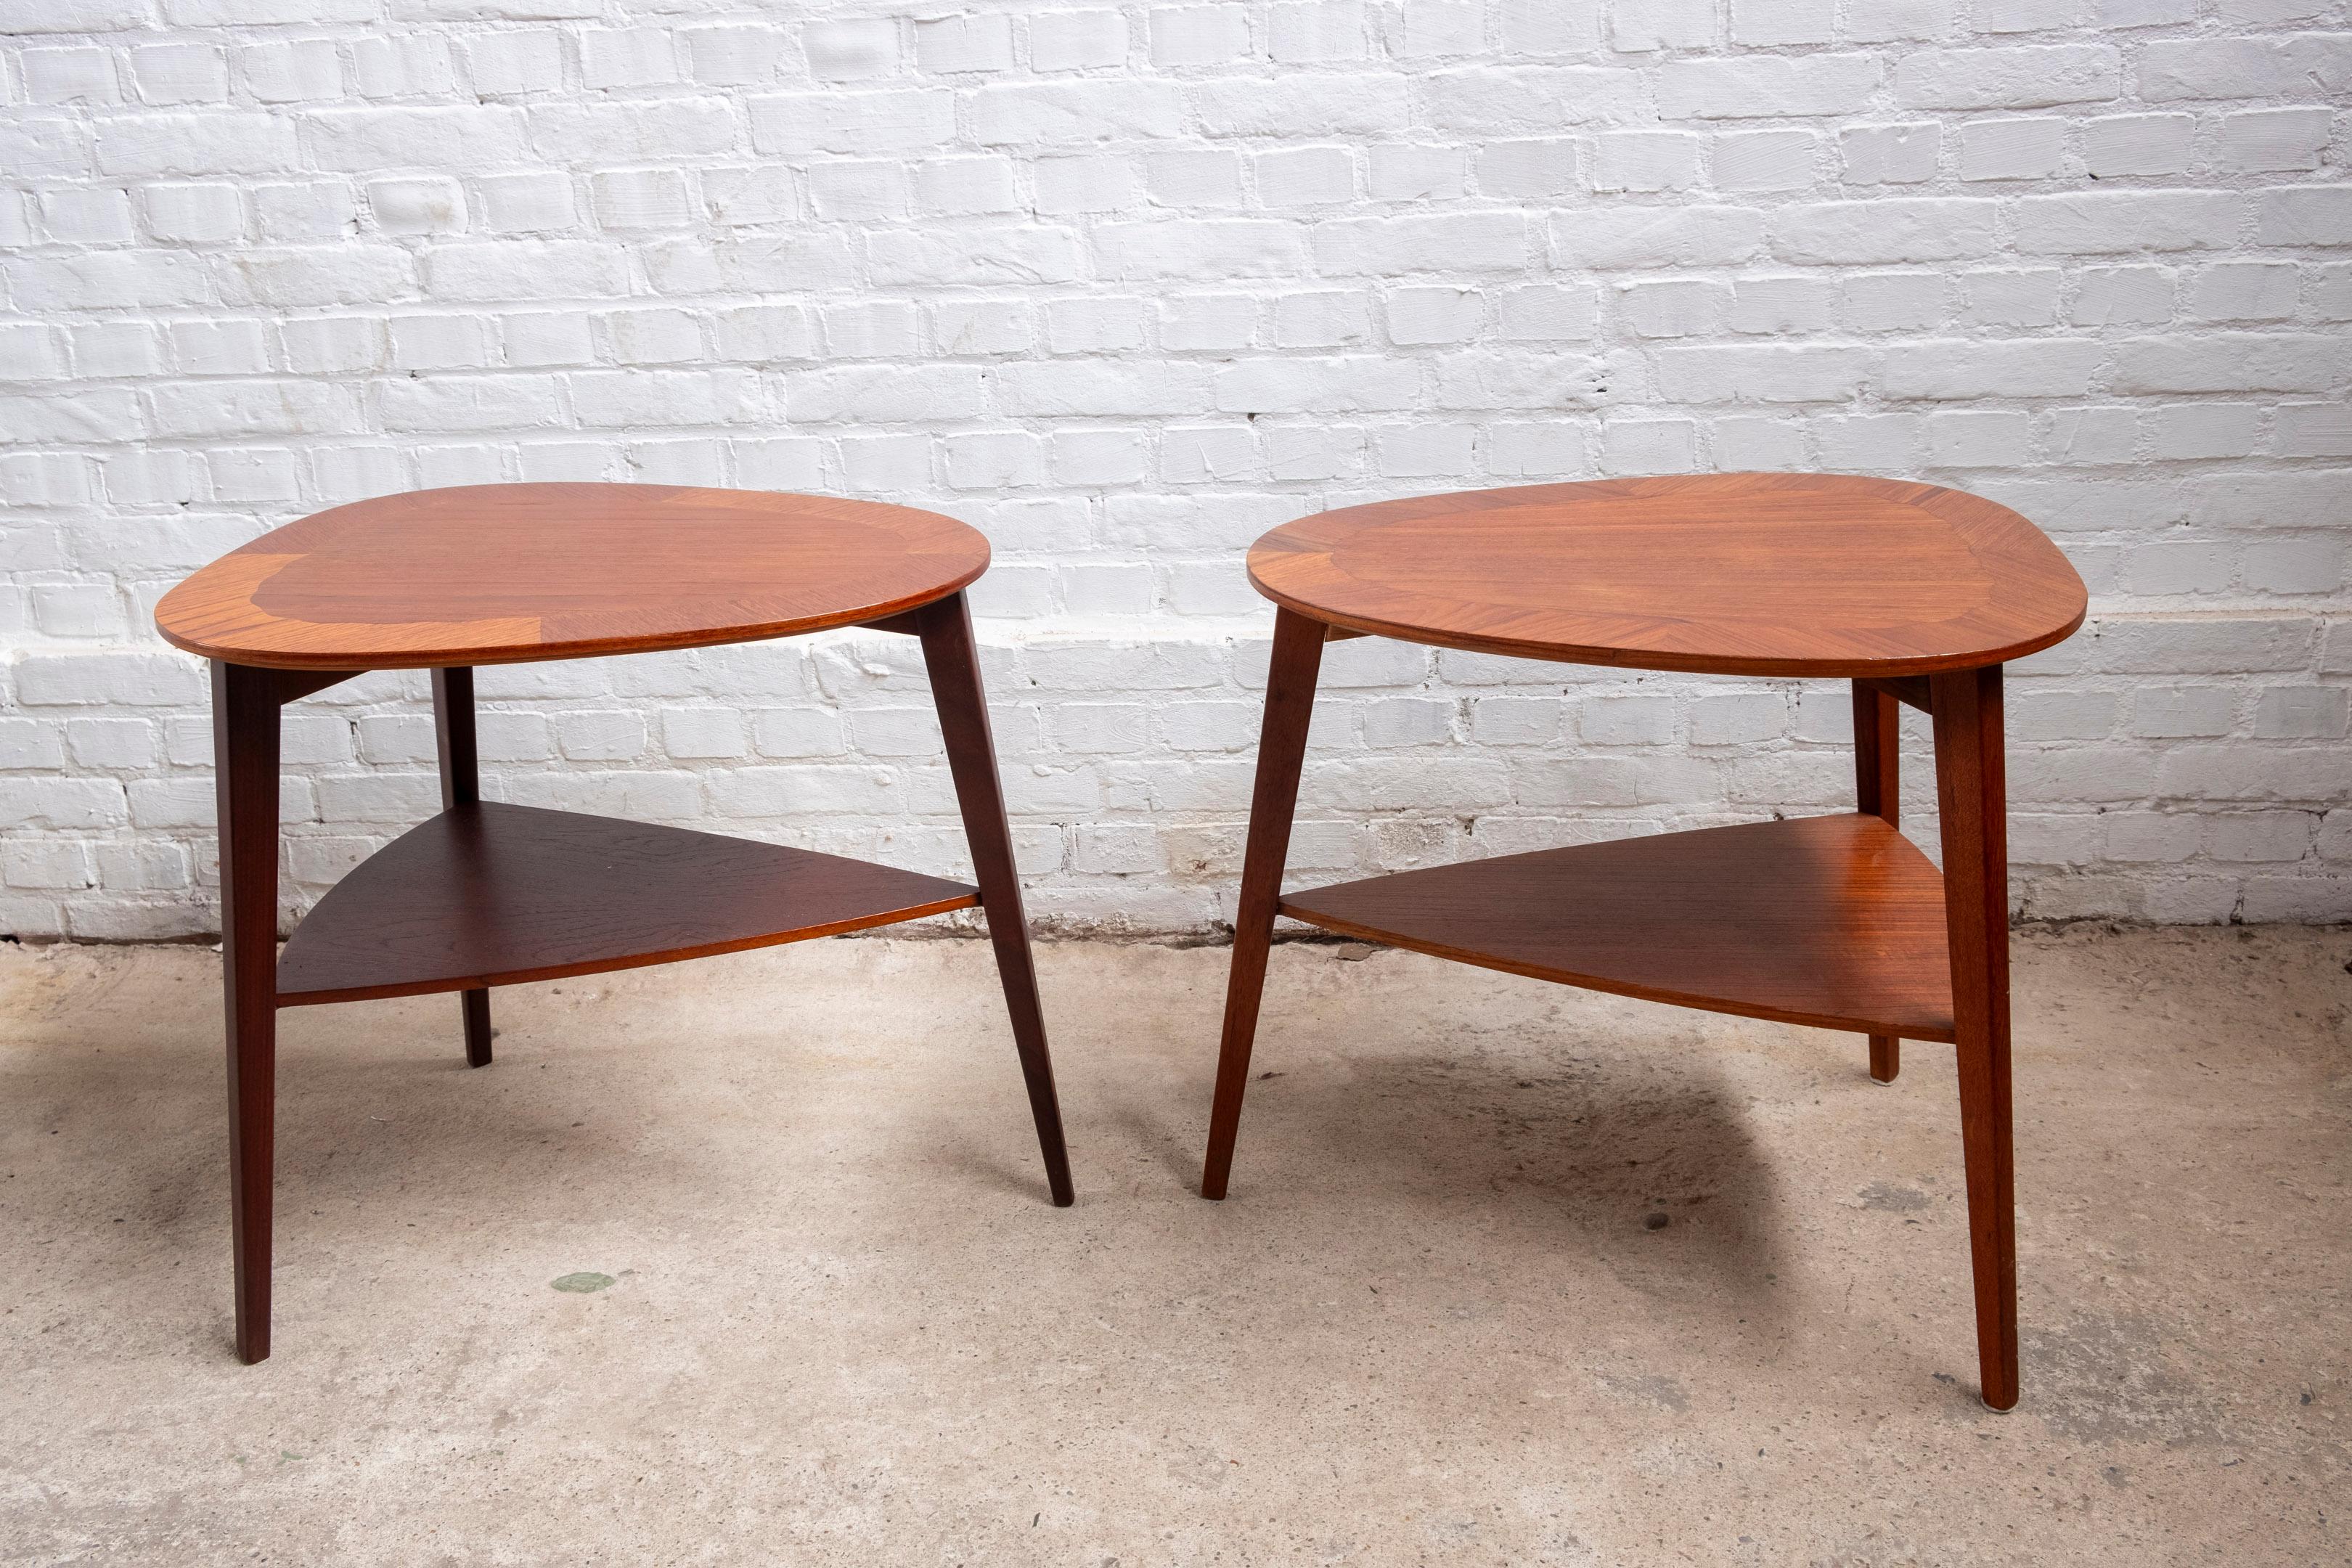 Marquetry Pair Midcentury Teak End Tables by Holger Georg Jensen, Kubus 1960s Denmark For Sale